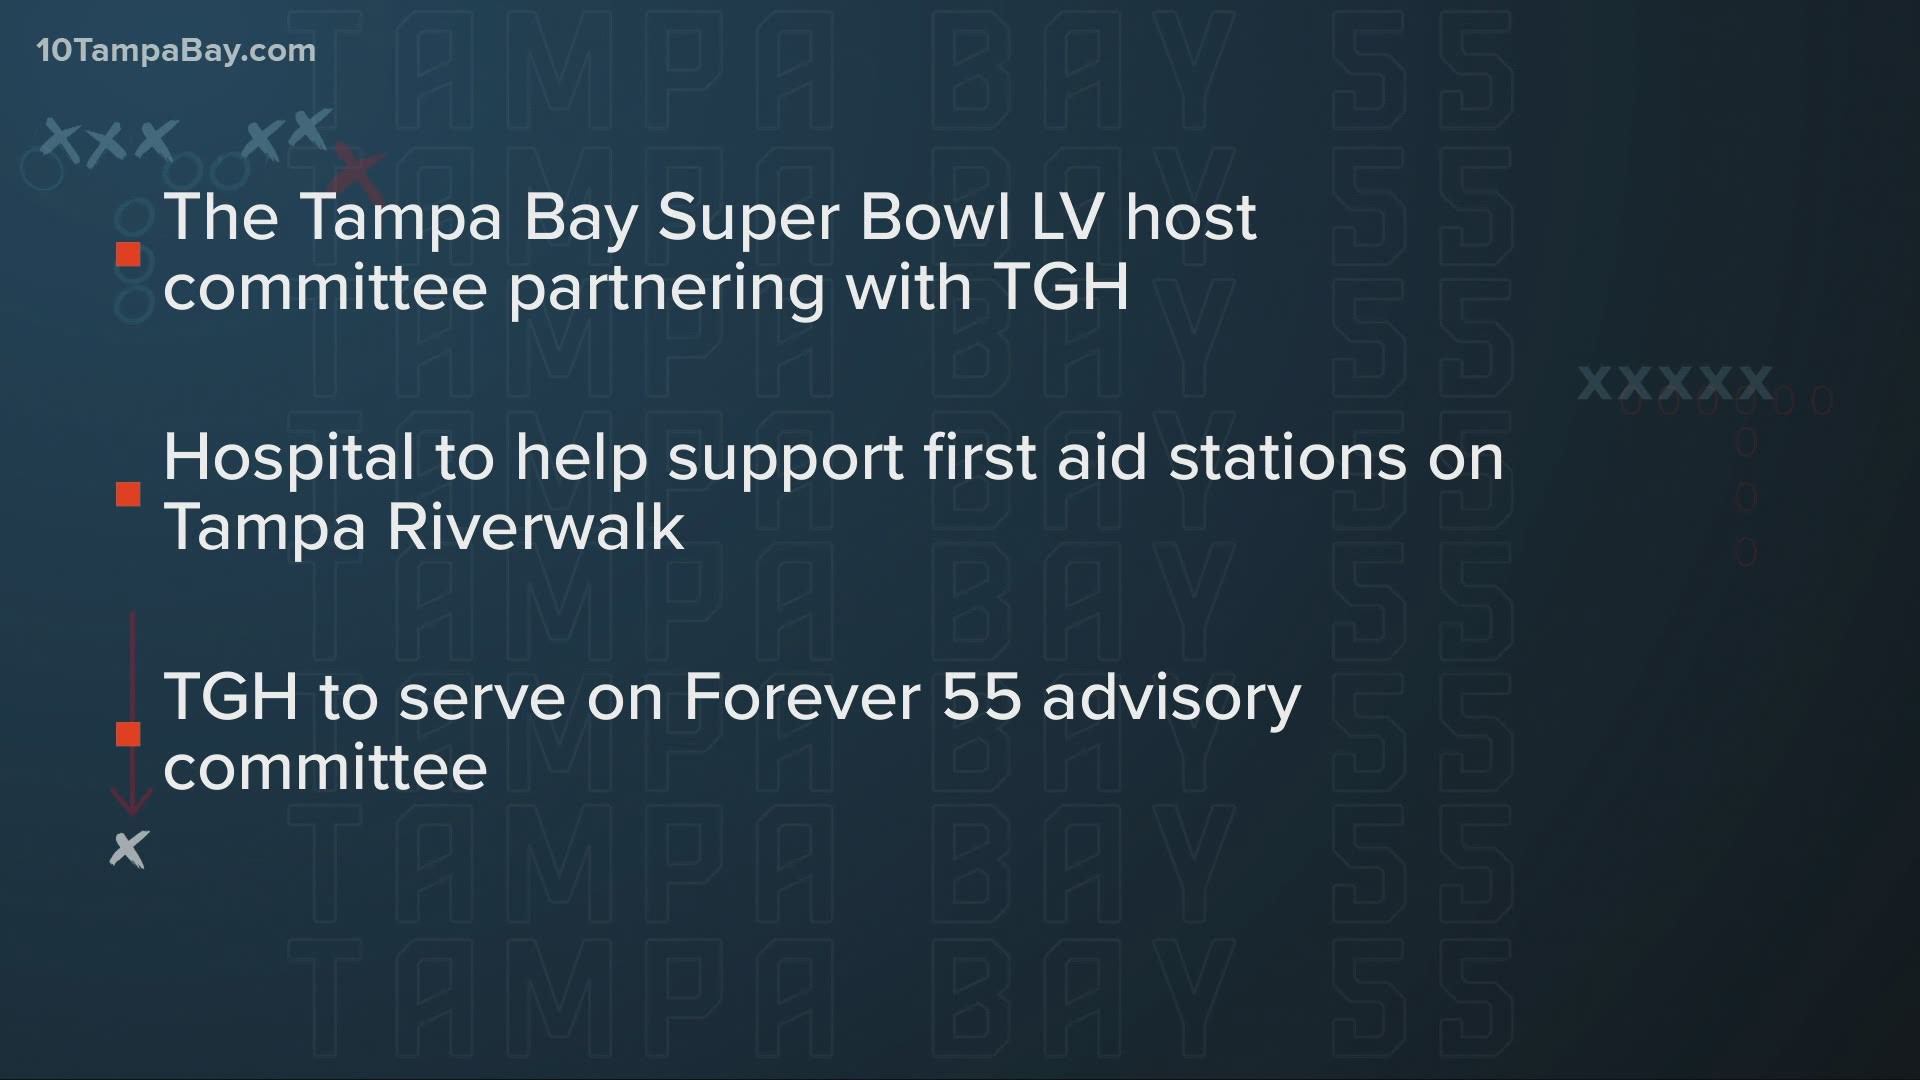 Tampa General will help support first aid stations on the Tampa Riverwalk in the weeklong event leading up to the big game.